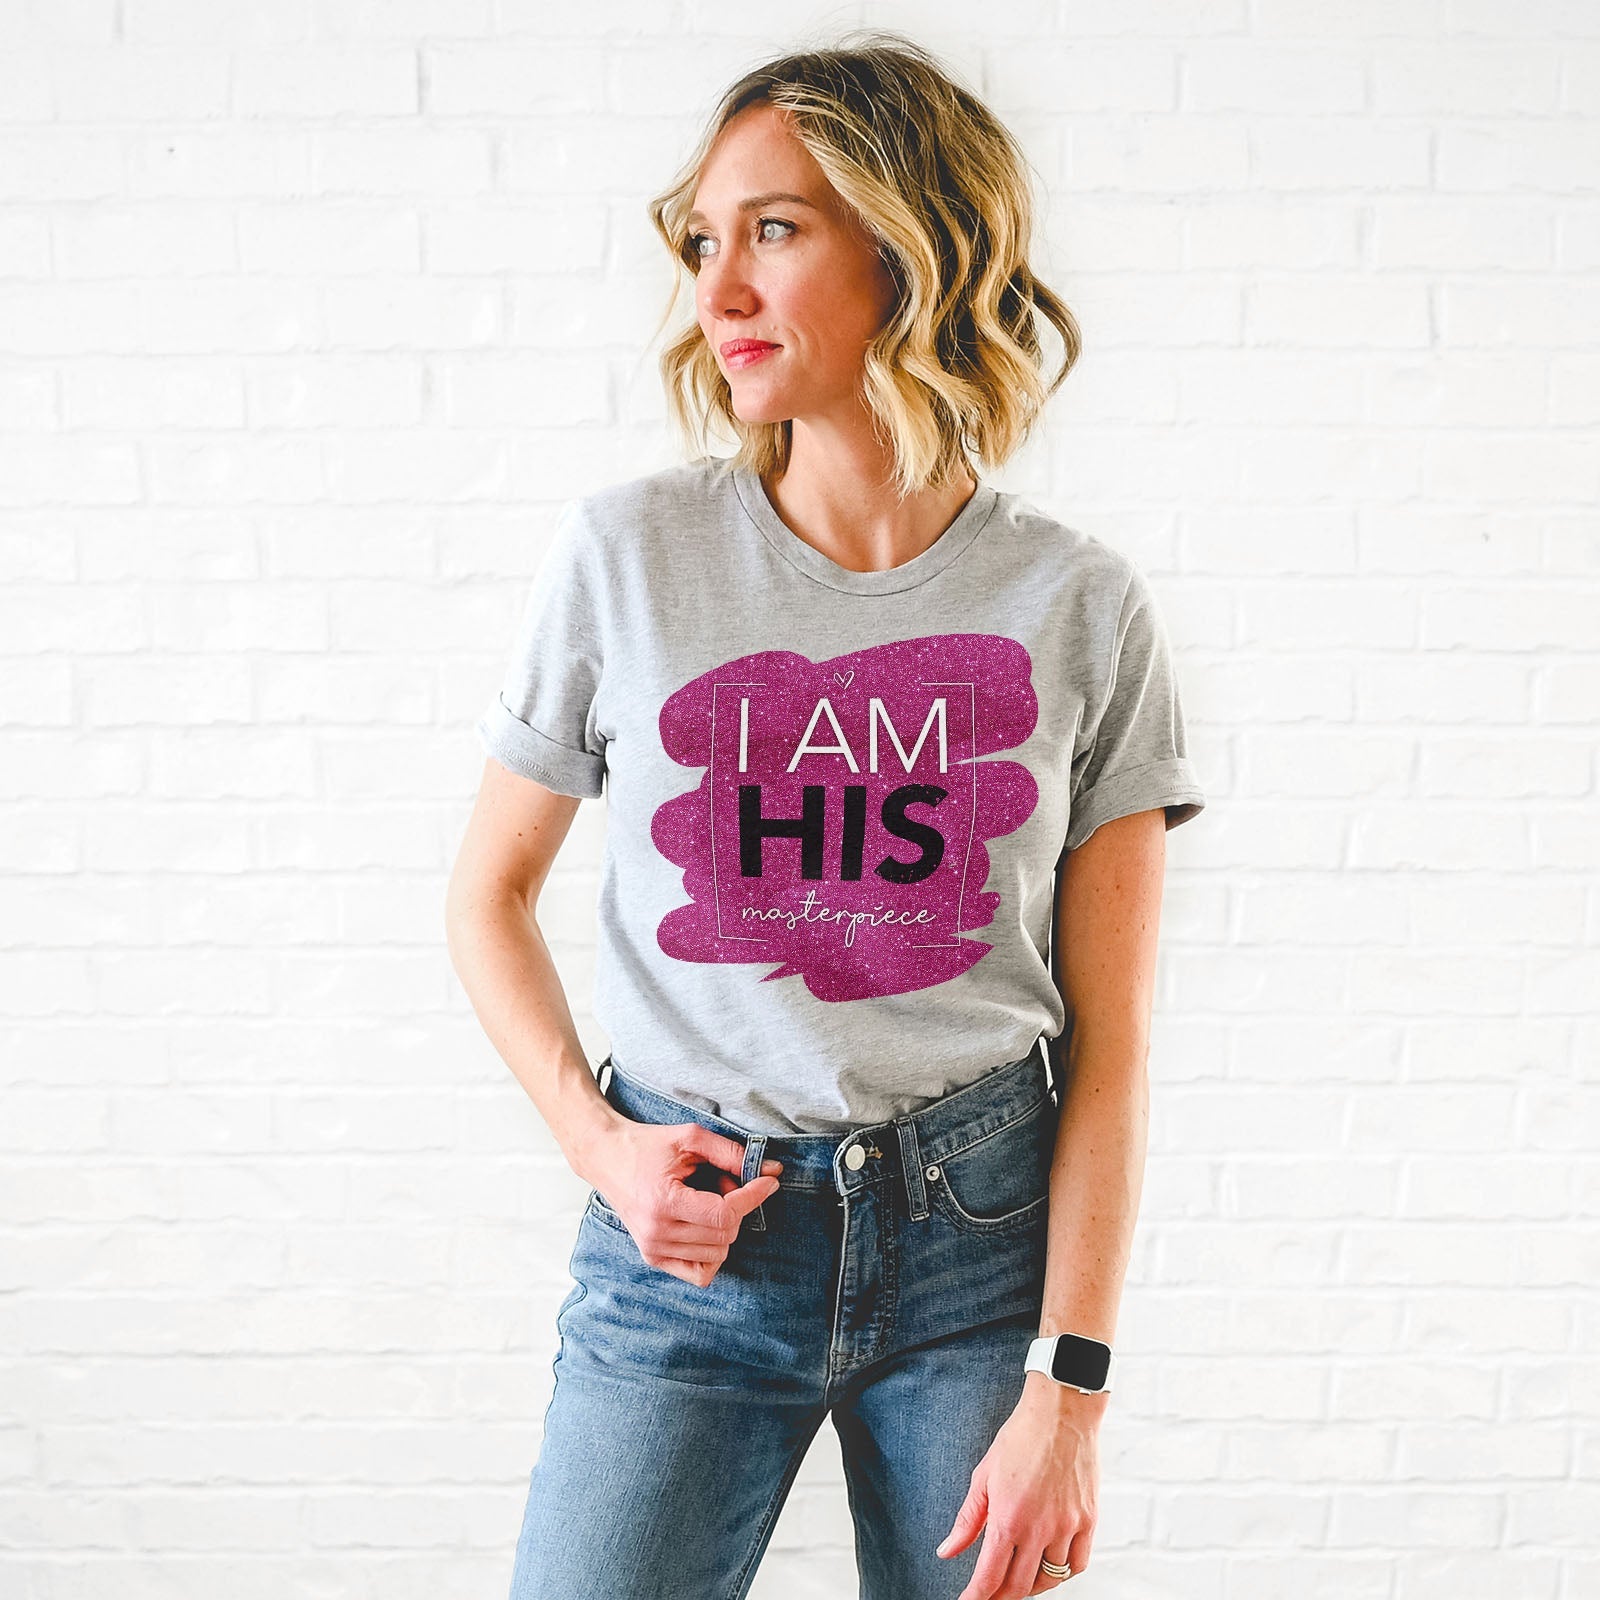 I Am His Masterpiece Pink Dazzler Tee Shirts For Women - Christian Shirts for Women - Religious Tee Shirts